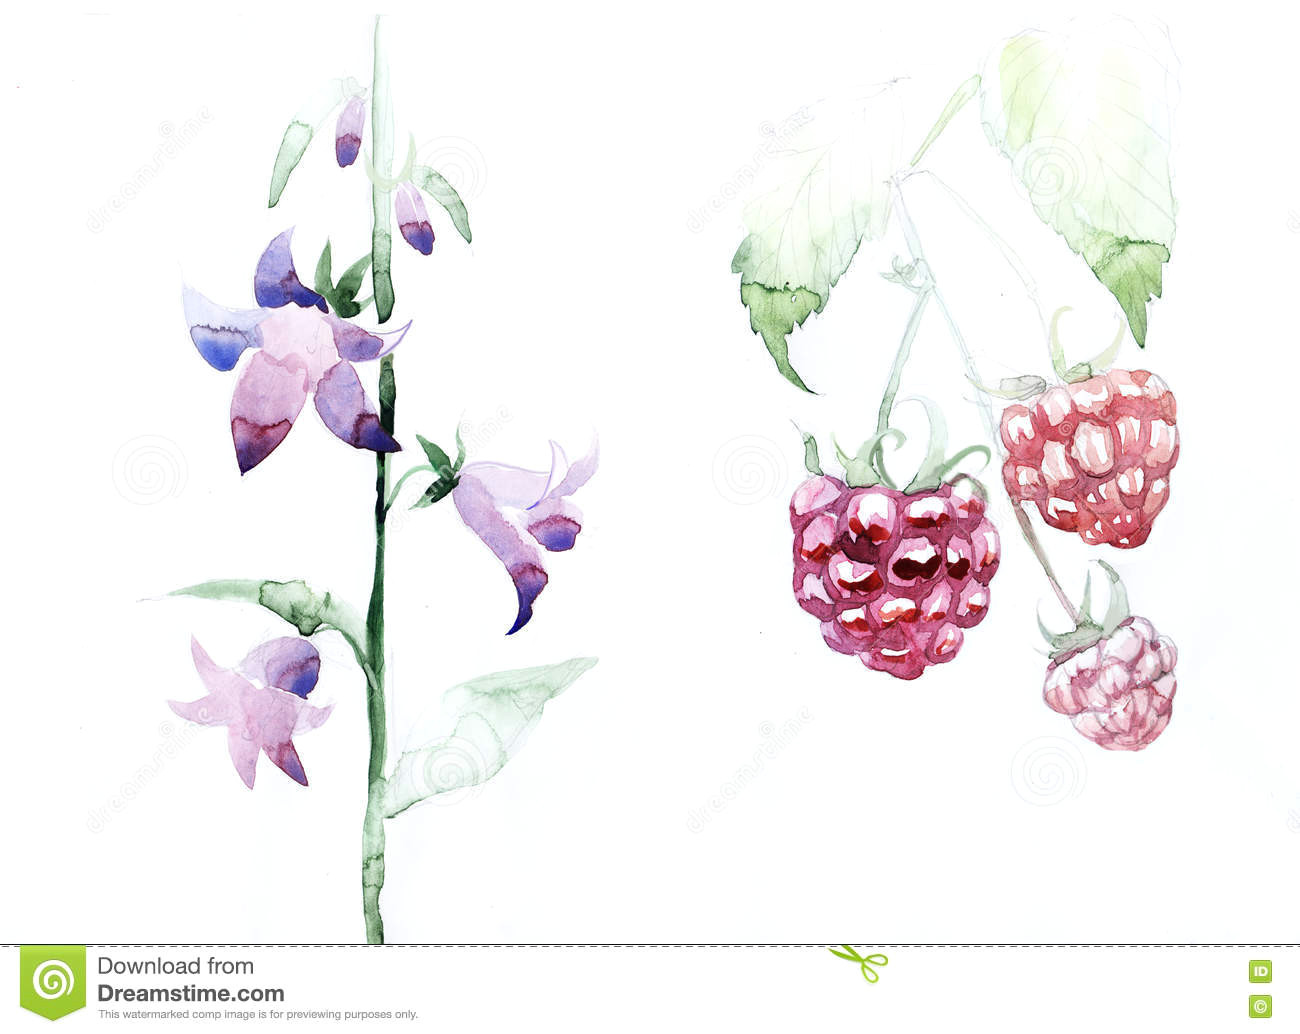 Drawing Of Flowers and Leaves Raspberries Fruit Leaves Bell Flowers Graphic Icon Waterco Stock